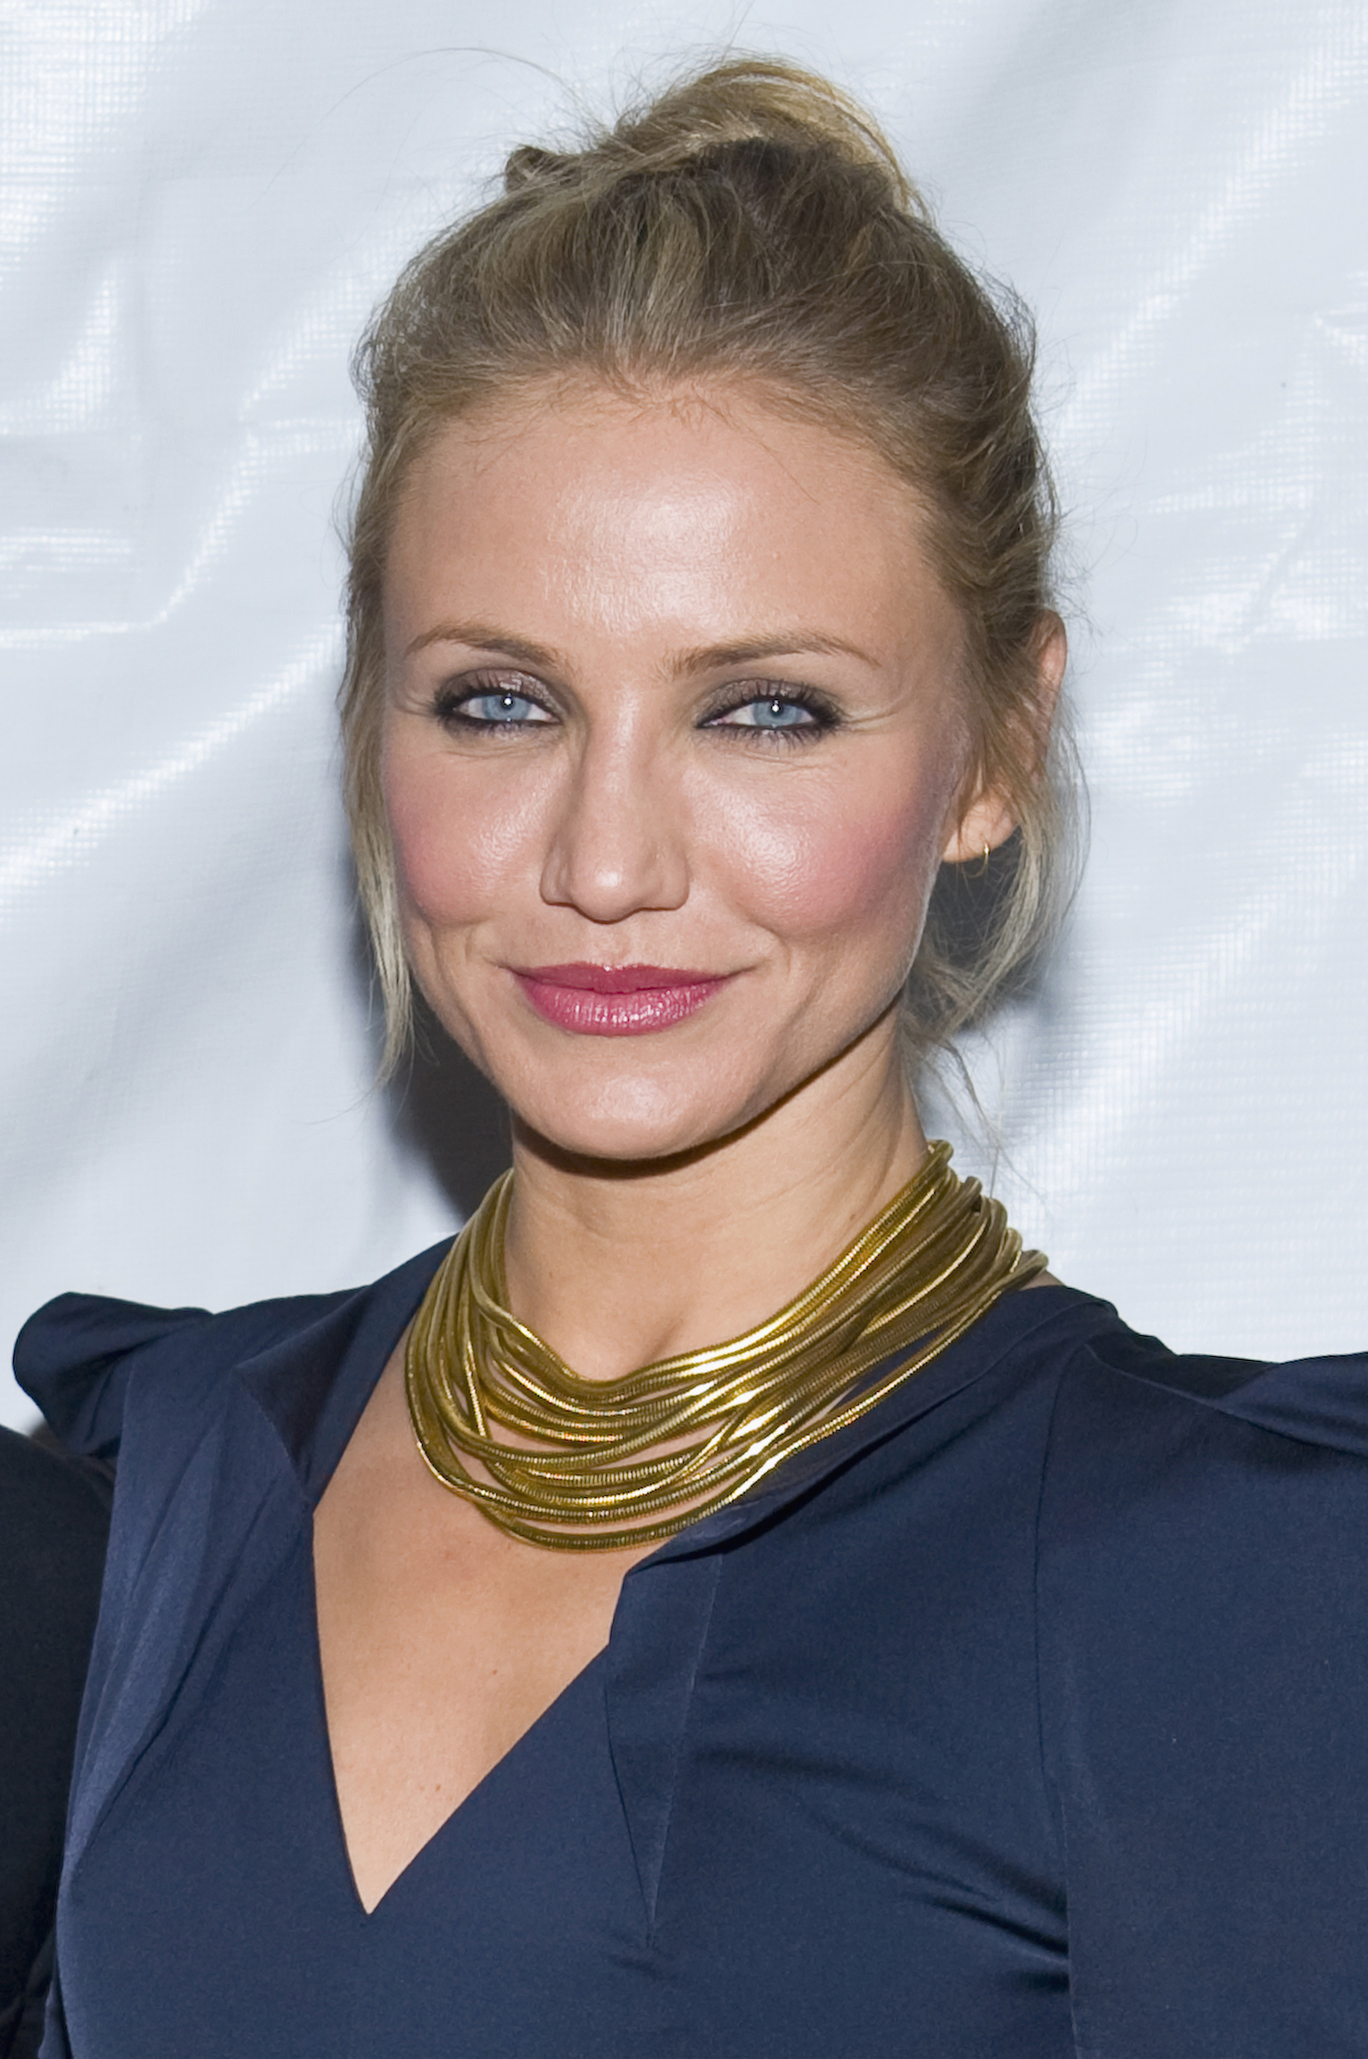 Cameron Diaz attends the New York premiere of "The Box," on November 4, 2009 | Source: Getty Images